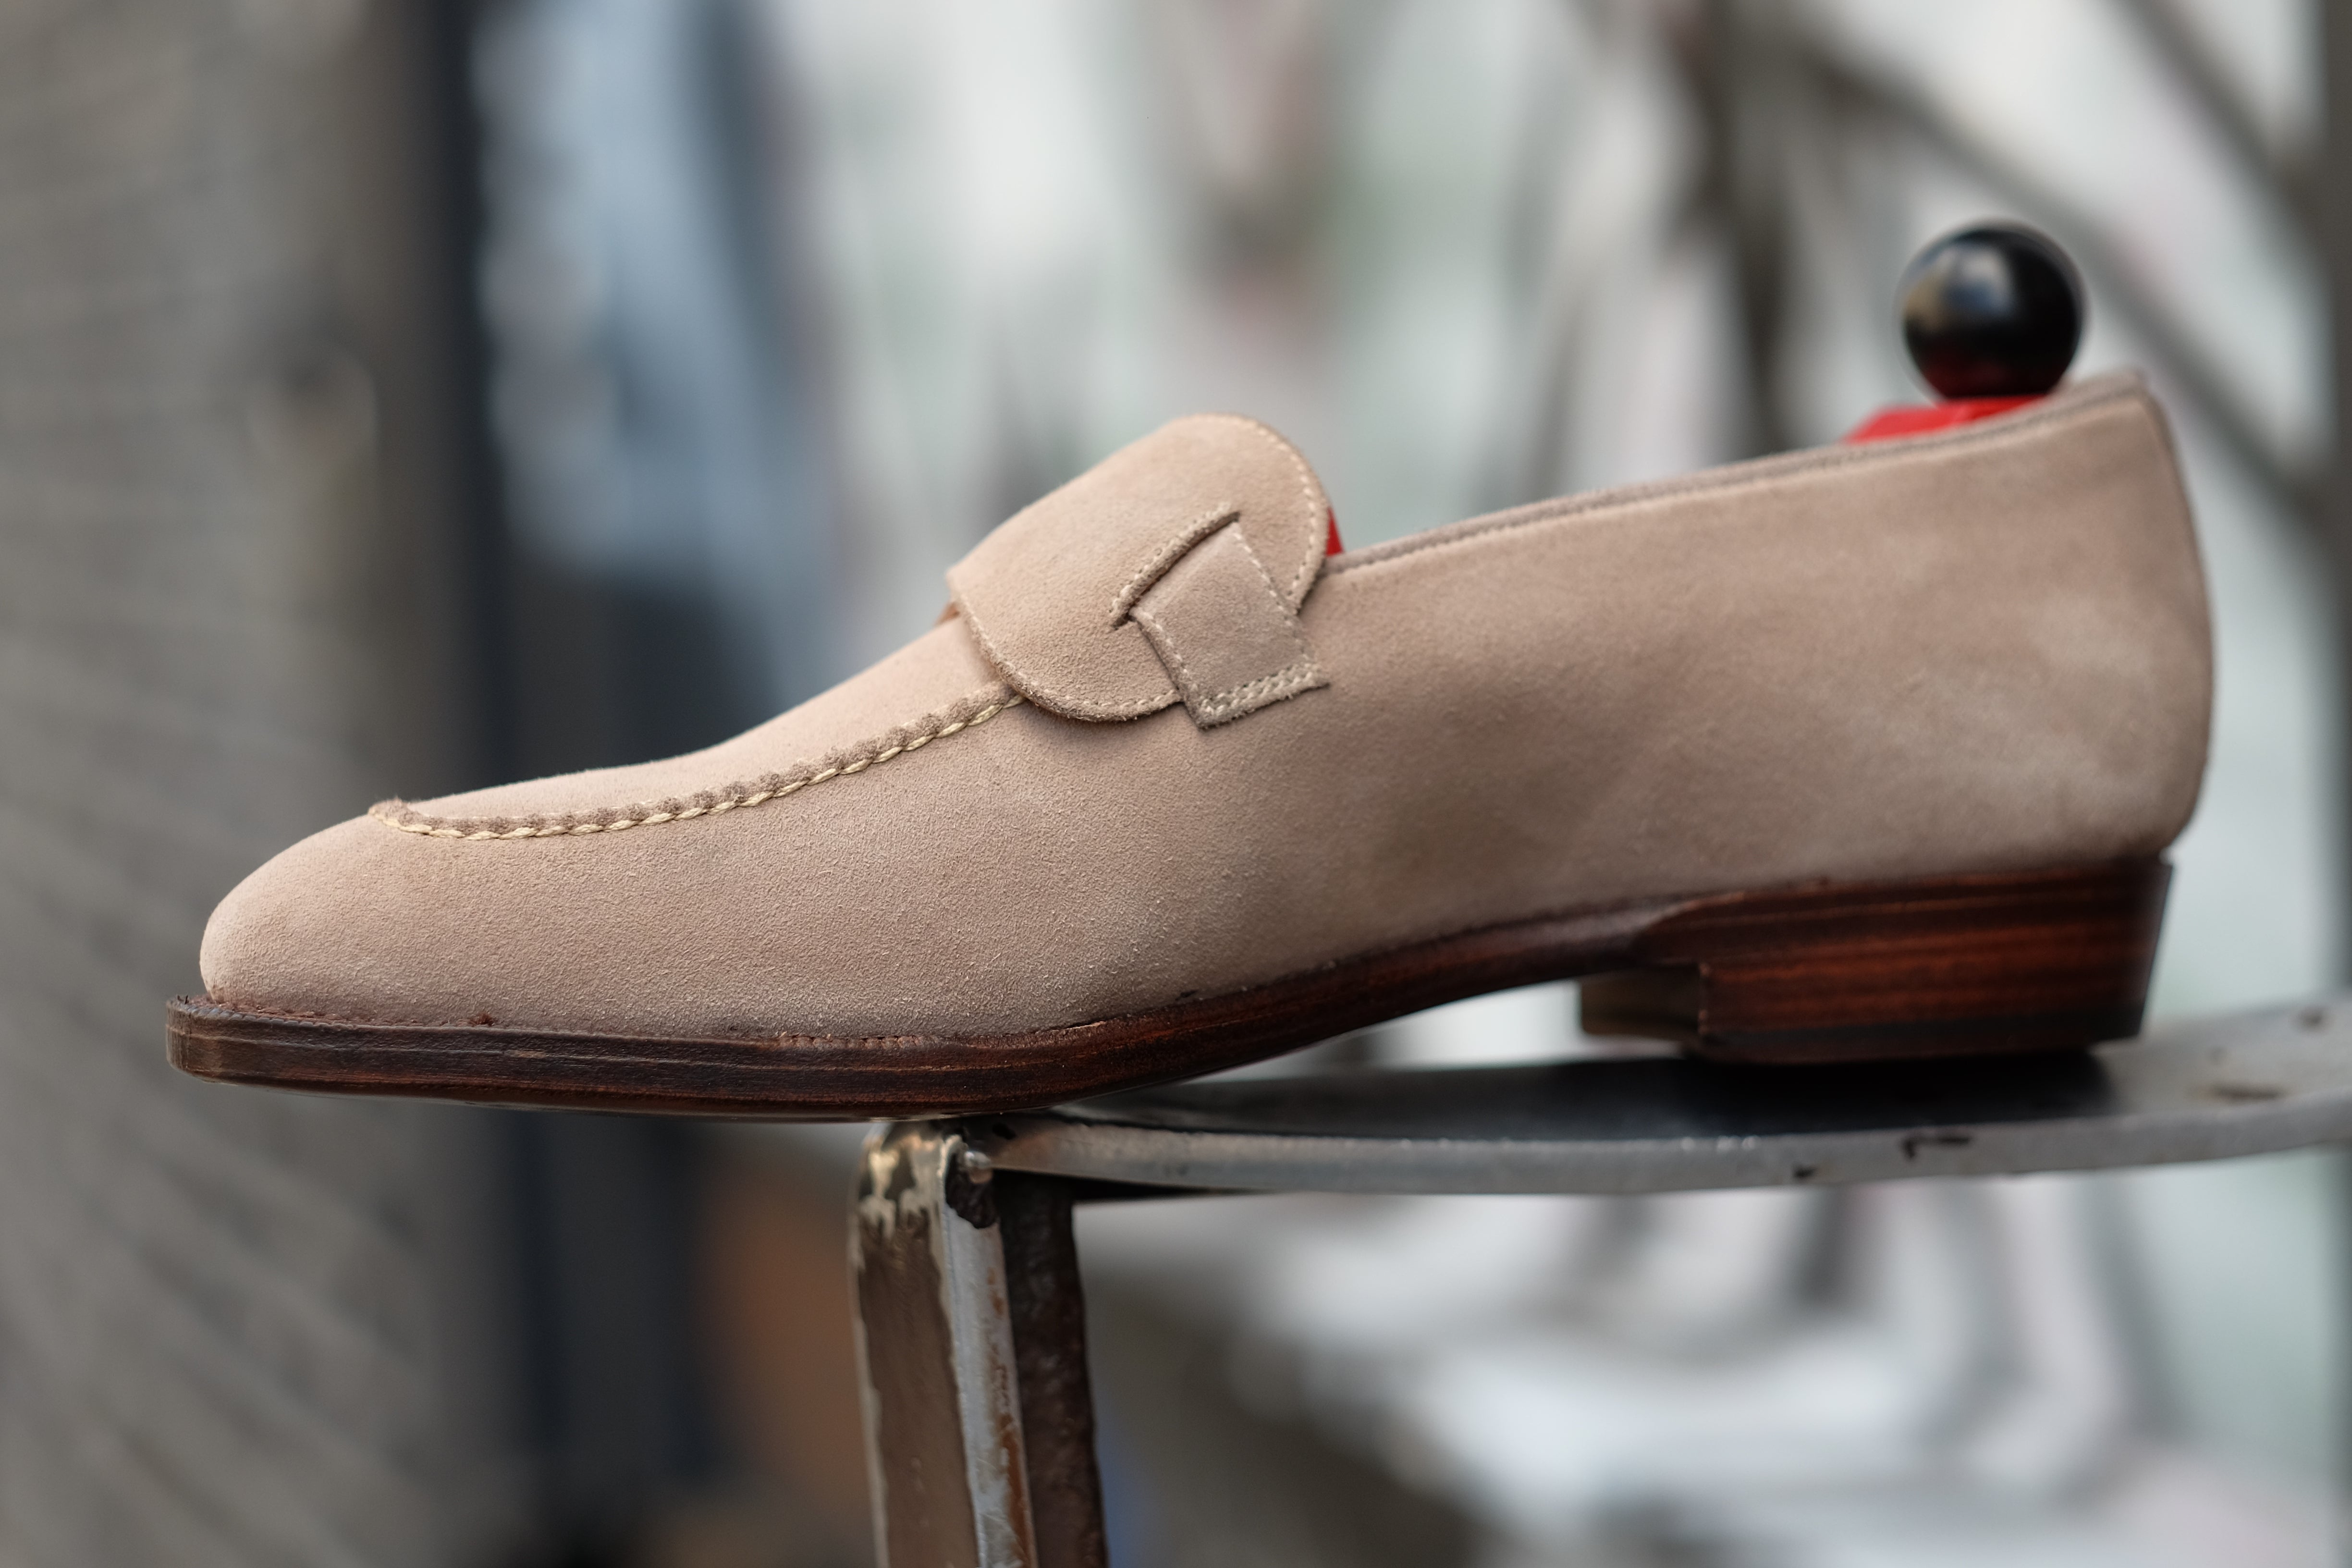 Hawthorne - Oatmeal Suede / Natural Stitching